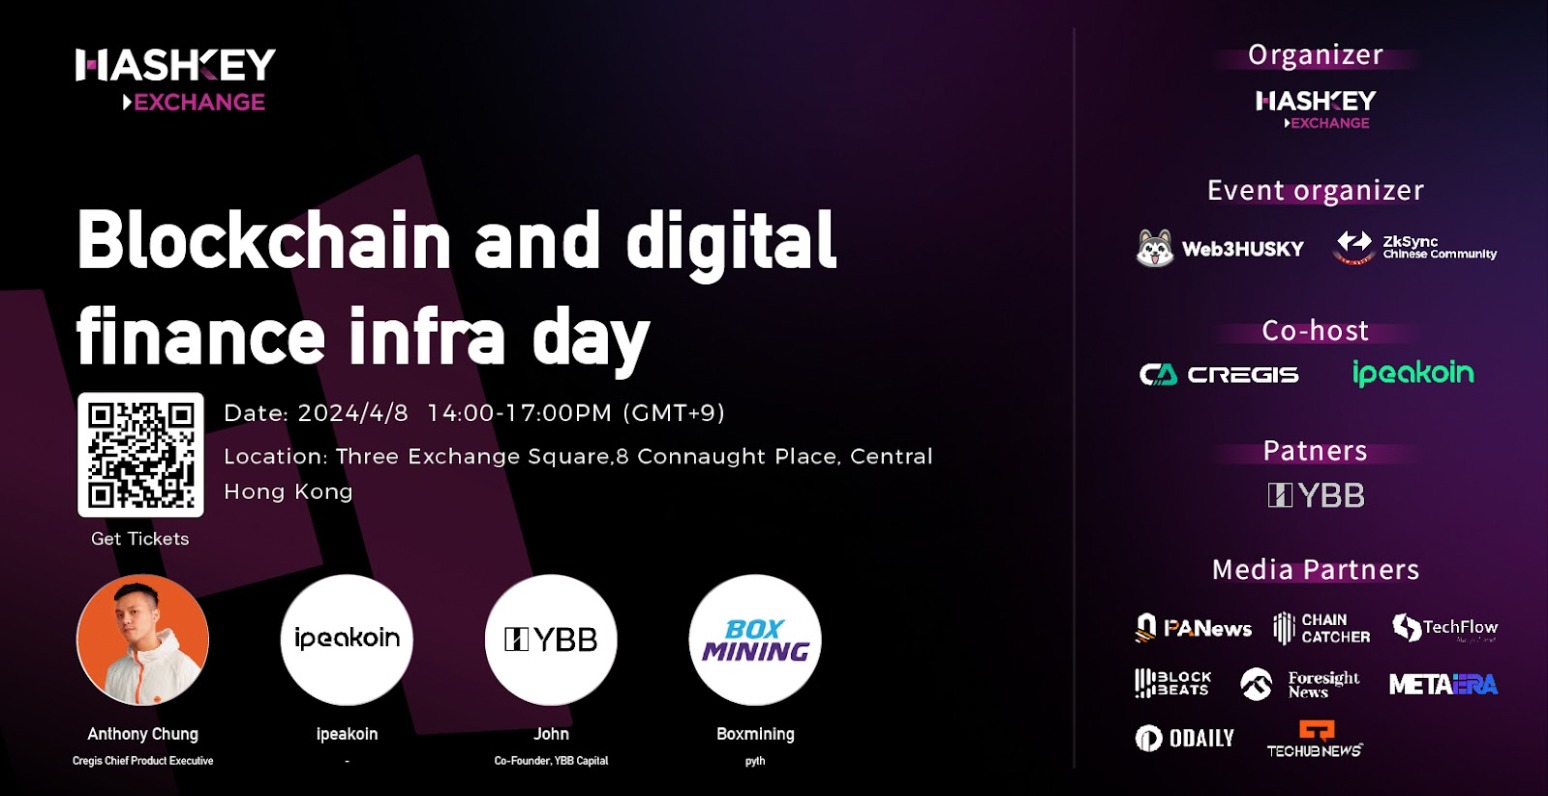 BLOCKCHAIN AND DIGHAL FINANCE INFRA DAY